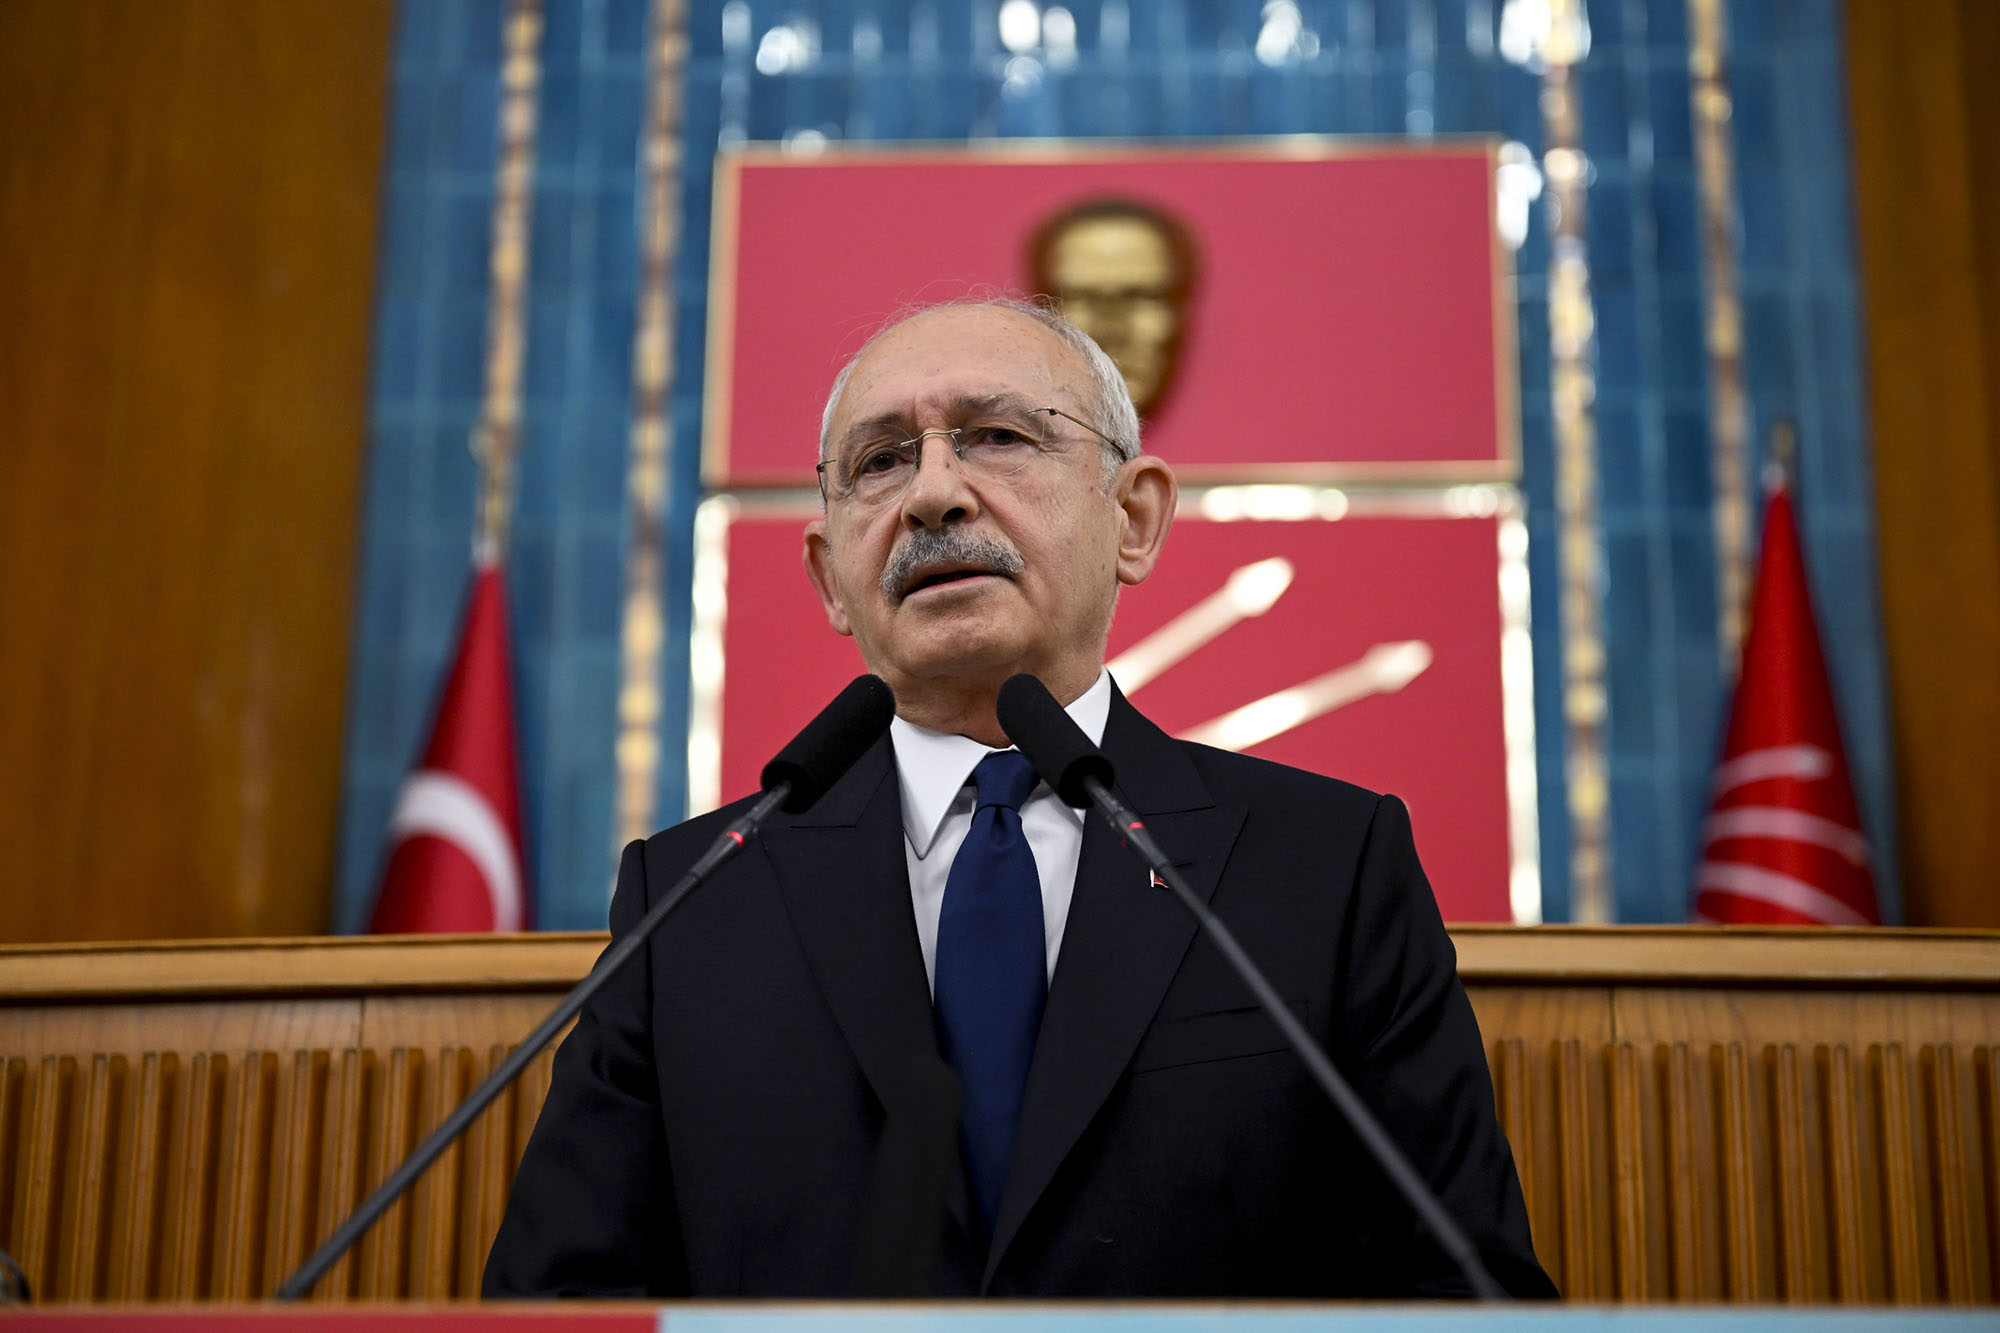 Leader of the Republican People's Party (CHP) Kemal Kilicdaroglu speaks during his party's group meeting at the Turkish Grand National Assembly in Ankara, Turkey, on January 24.